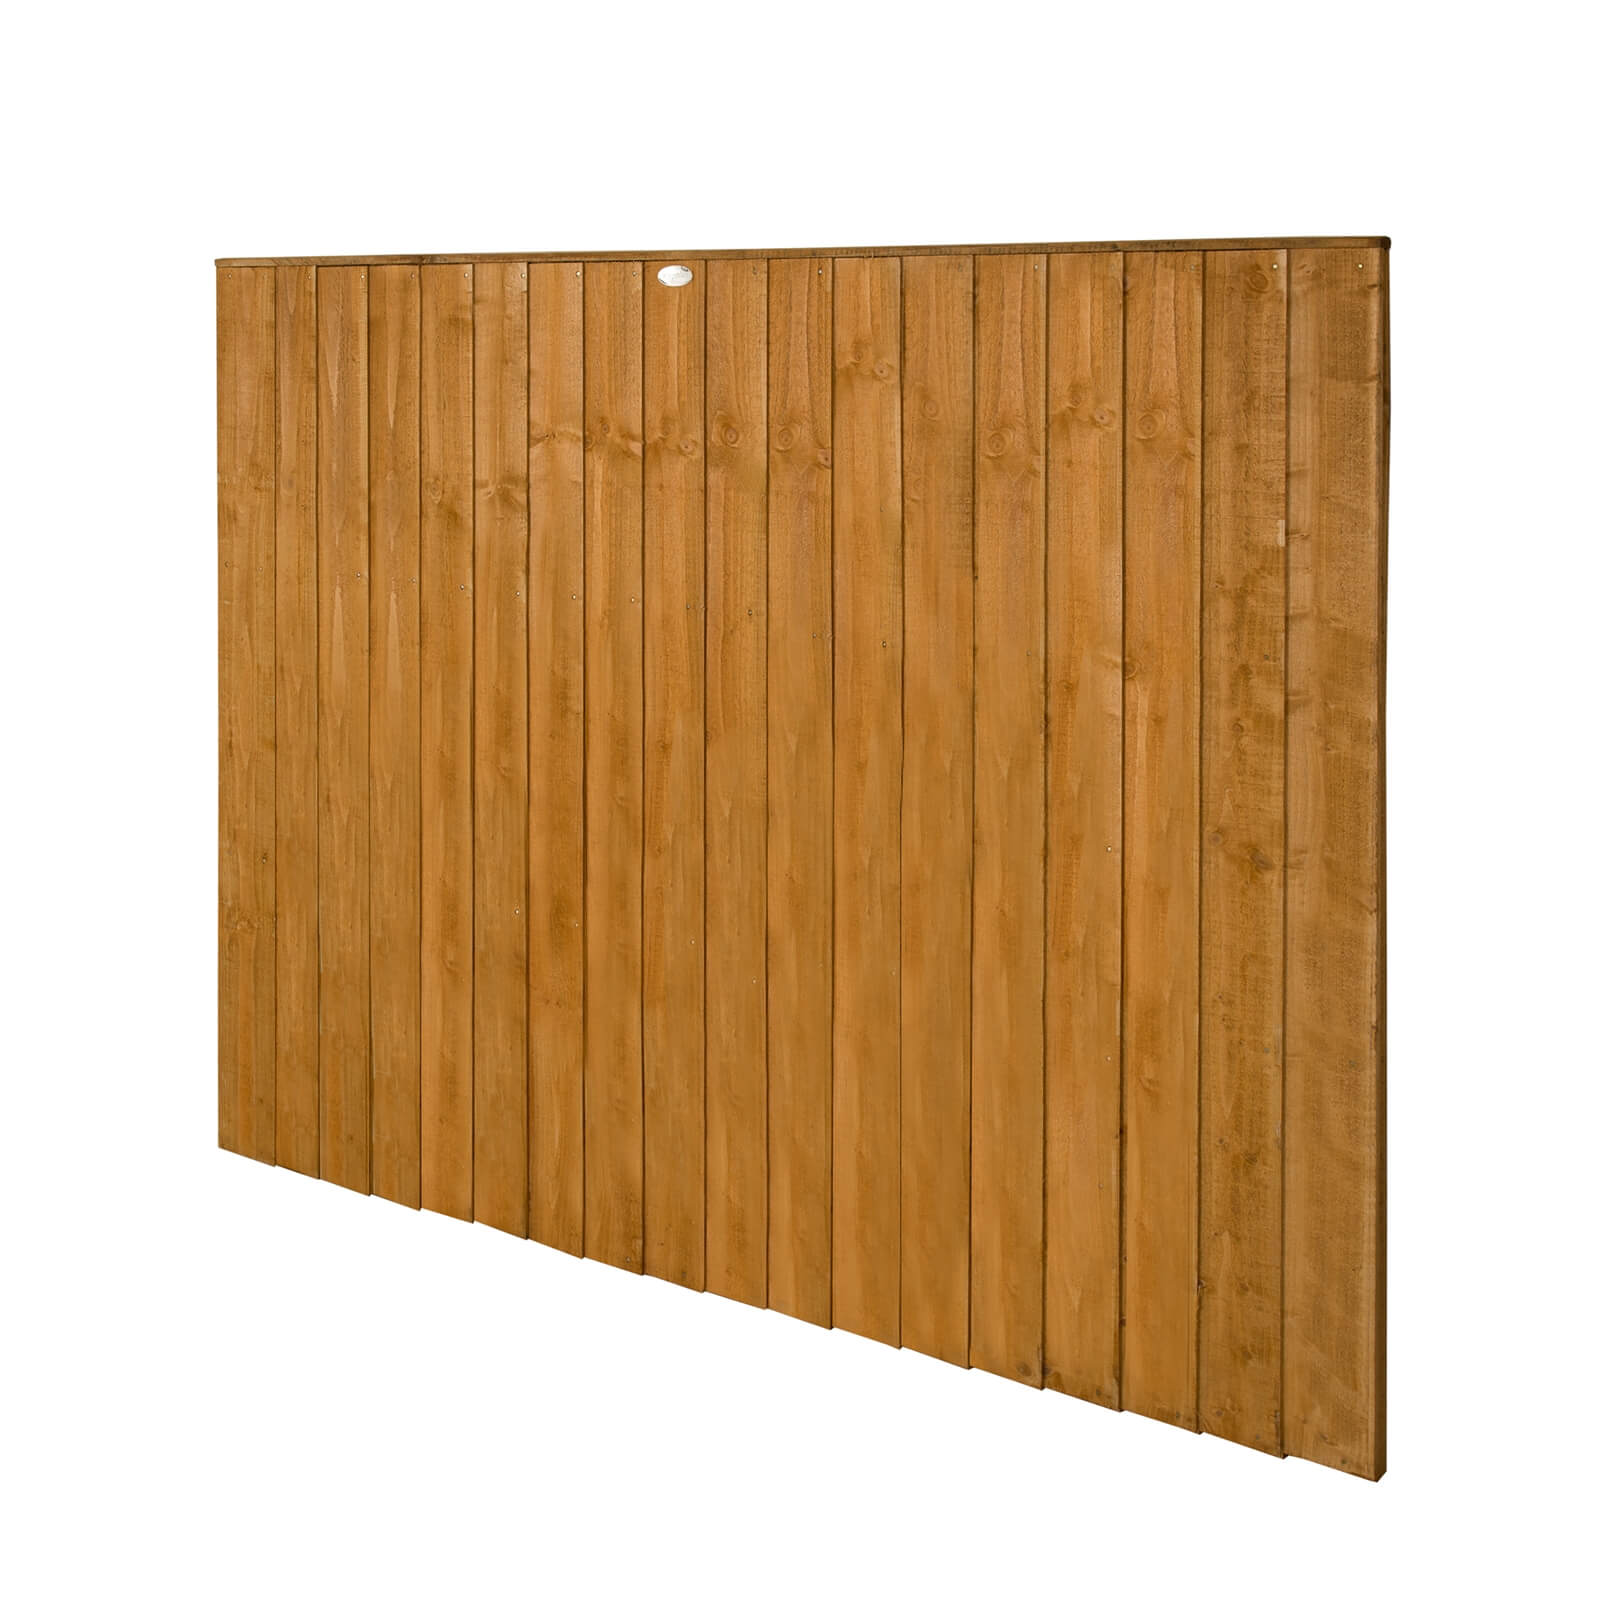 Forest Featherdge Dip Treated Fence Panel - 5ft - Pack of 5